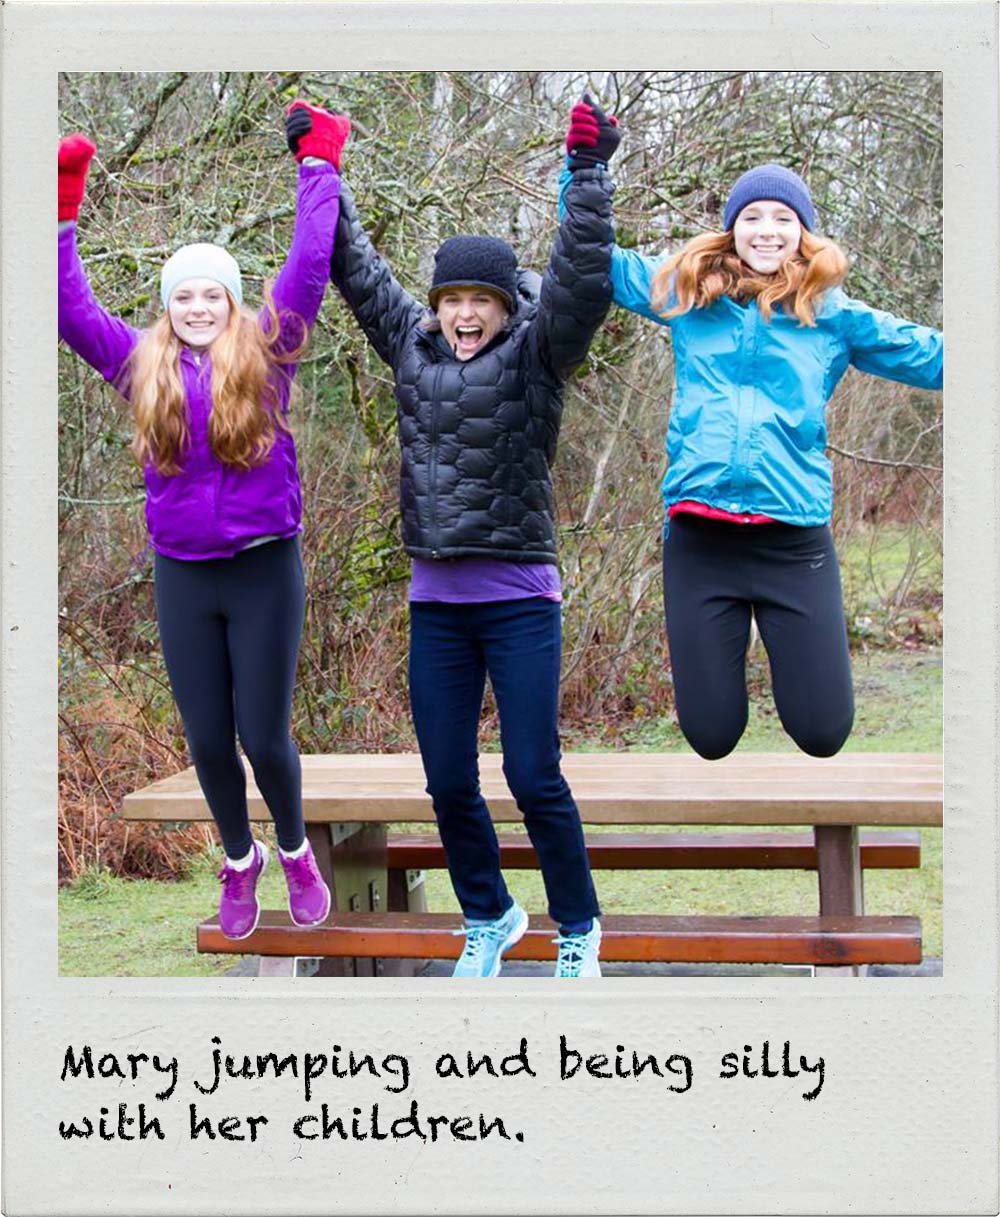 Mary jumping and being silly with her children.